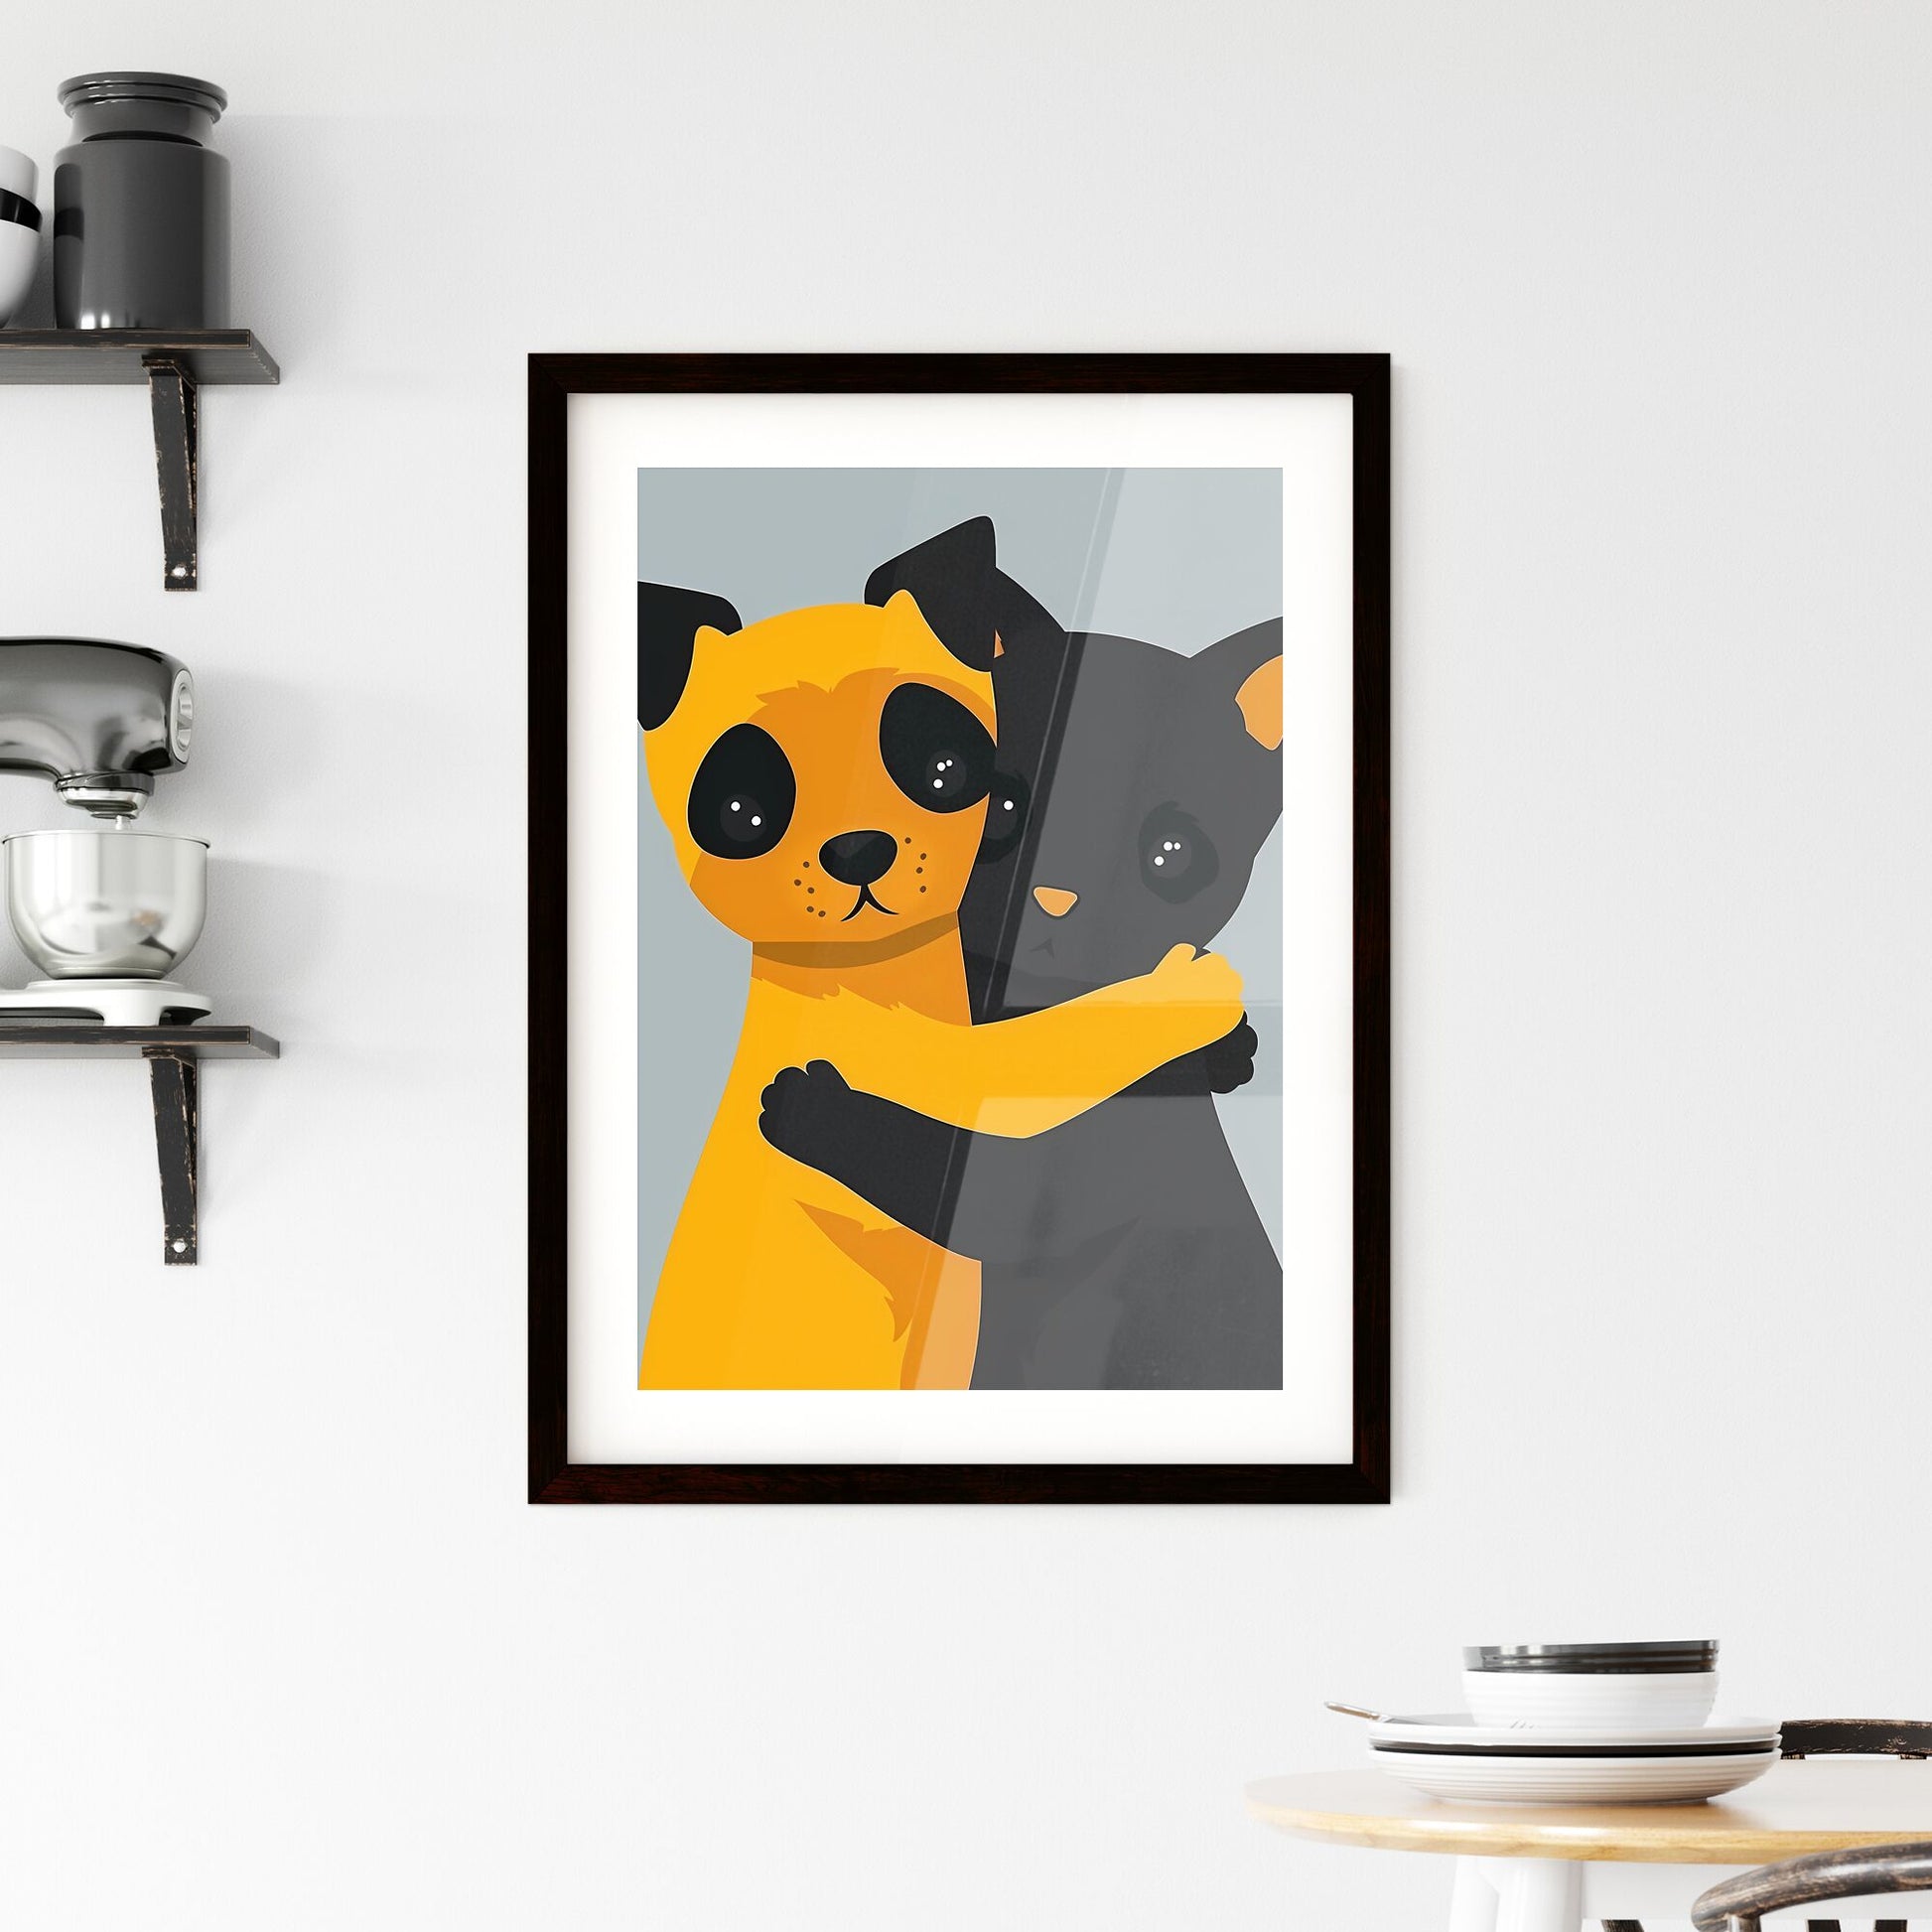 A Poster of two dogs holding each other - A Yellow And Black Cat Hugging Default Title